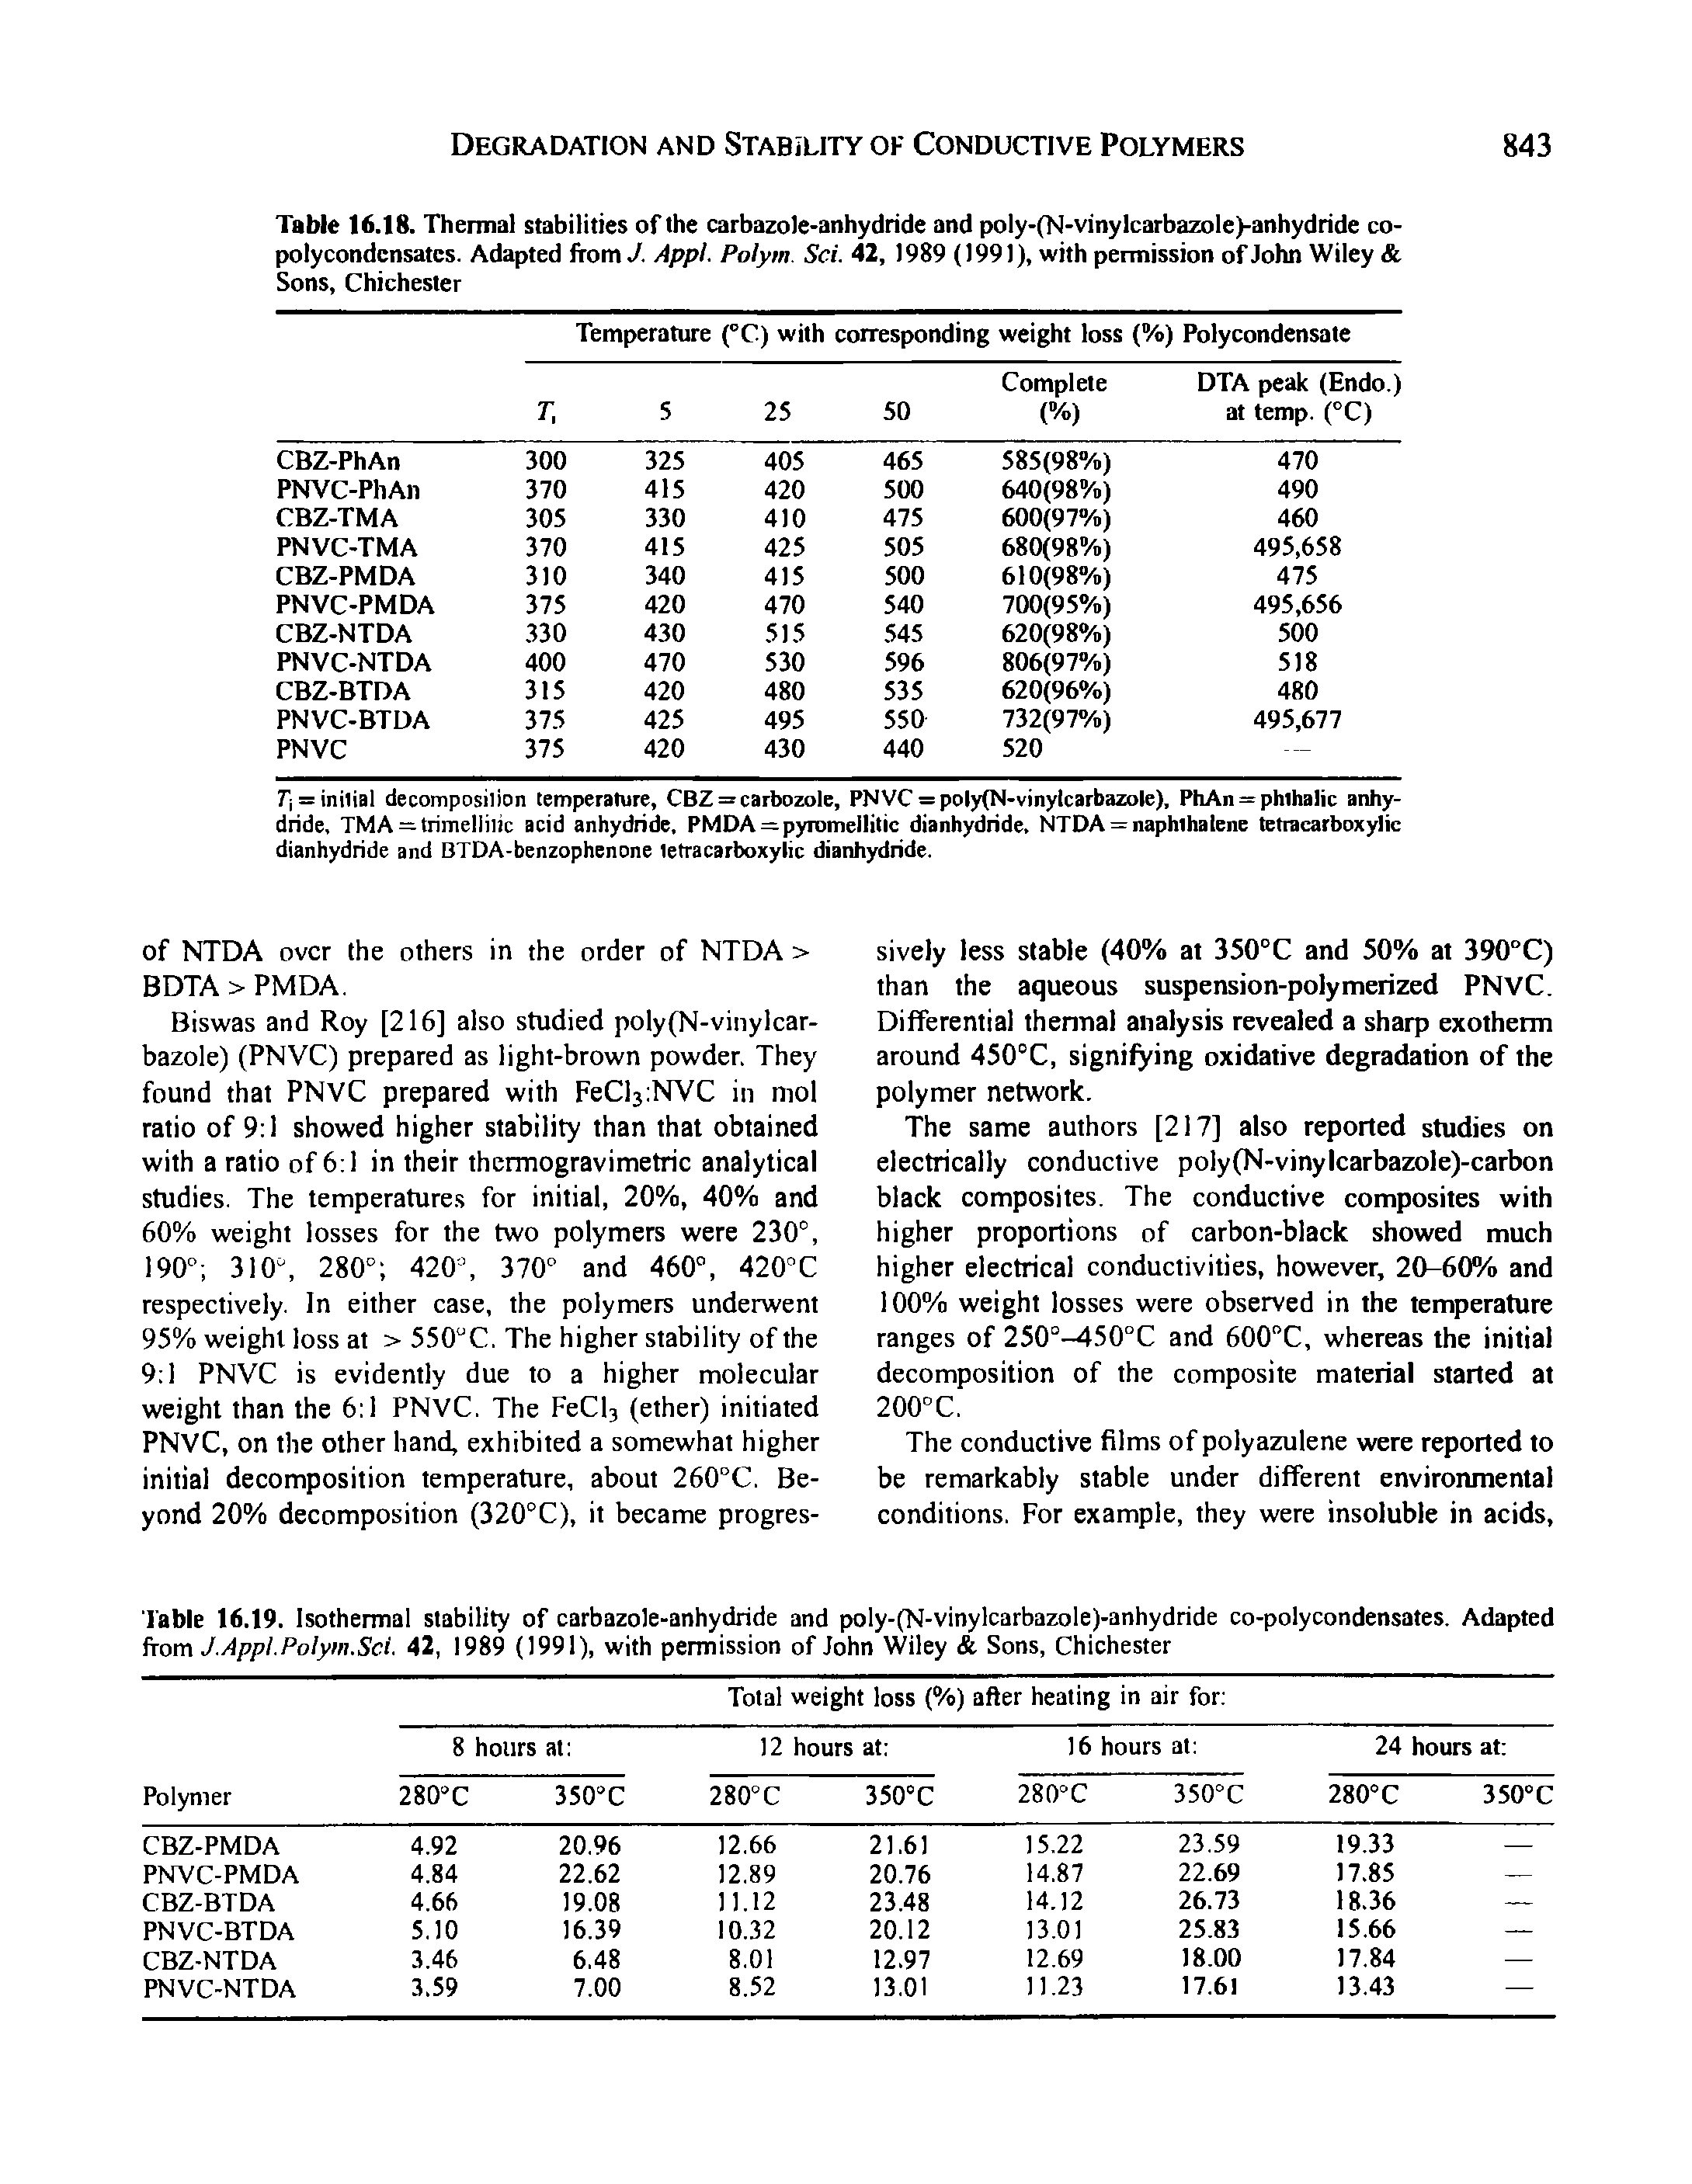 Table 16.19. Isothermal stability of carbazole-anhydride and poly-(N-vinylearbazole)-anhydride eo-polyeondensates. Adapted from J.Appl.Polym.Sci. 42, 1989 (1991), with permission of John Wiley Sons, Chichester...